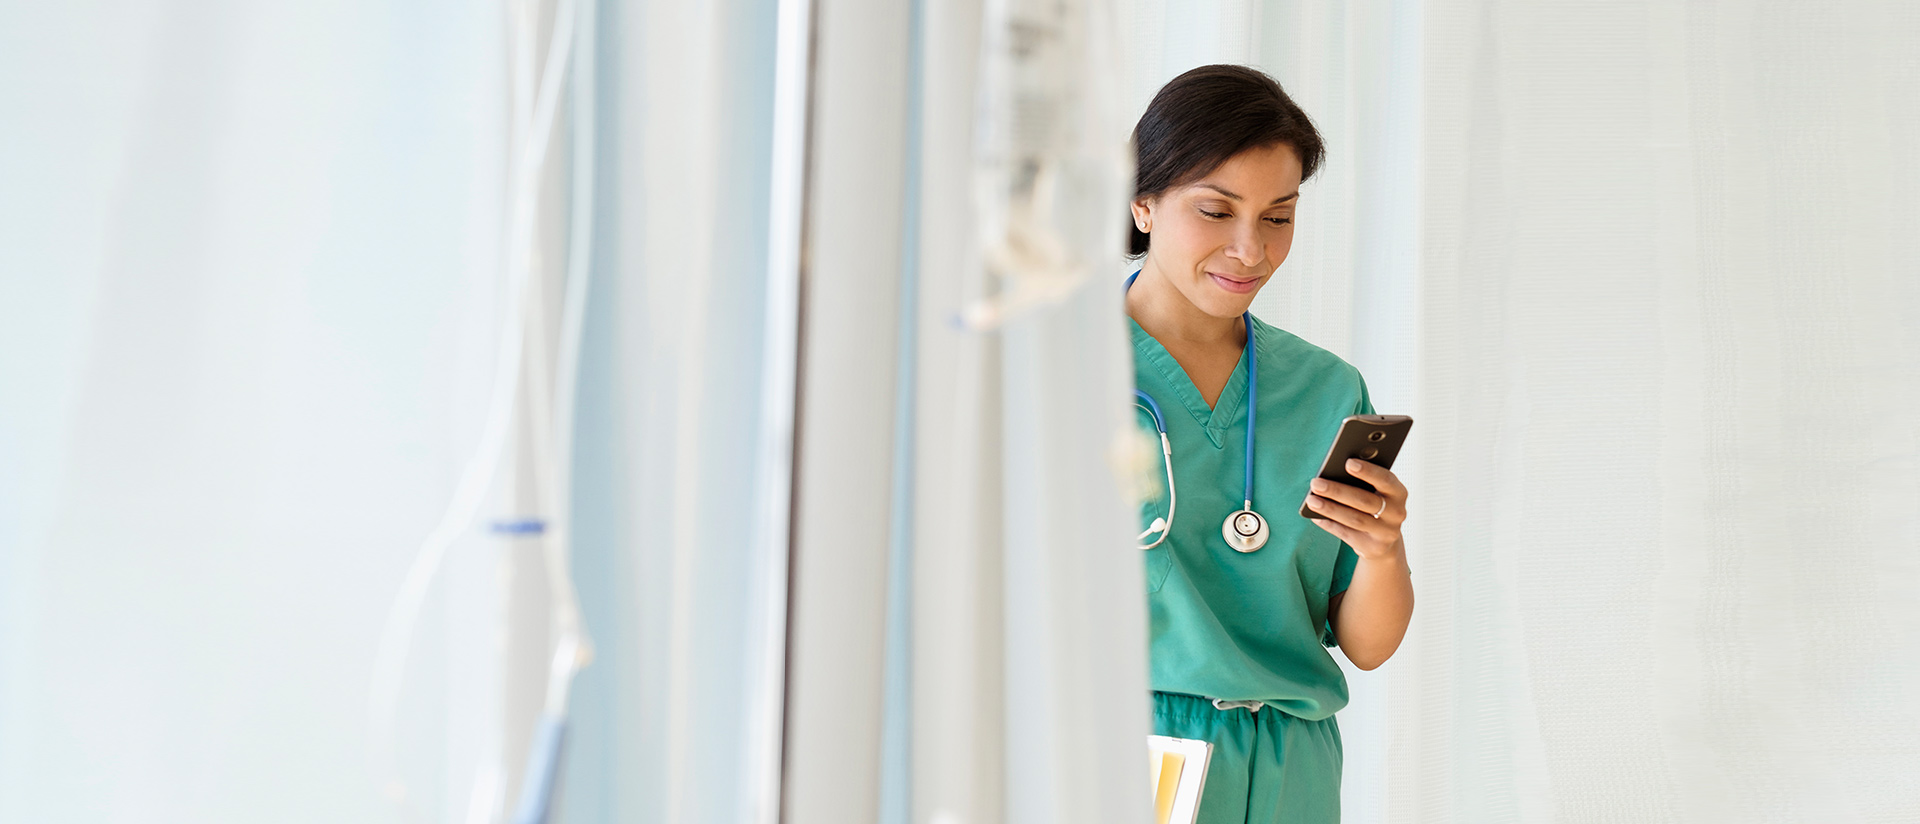 female nurse looking at cell phone